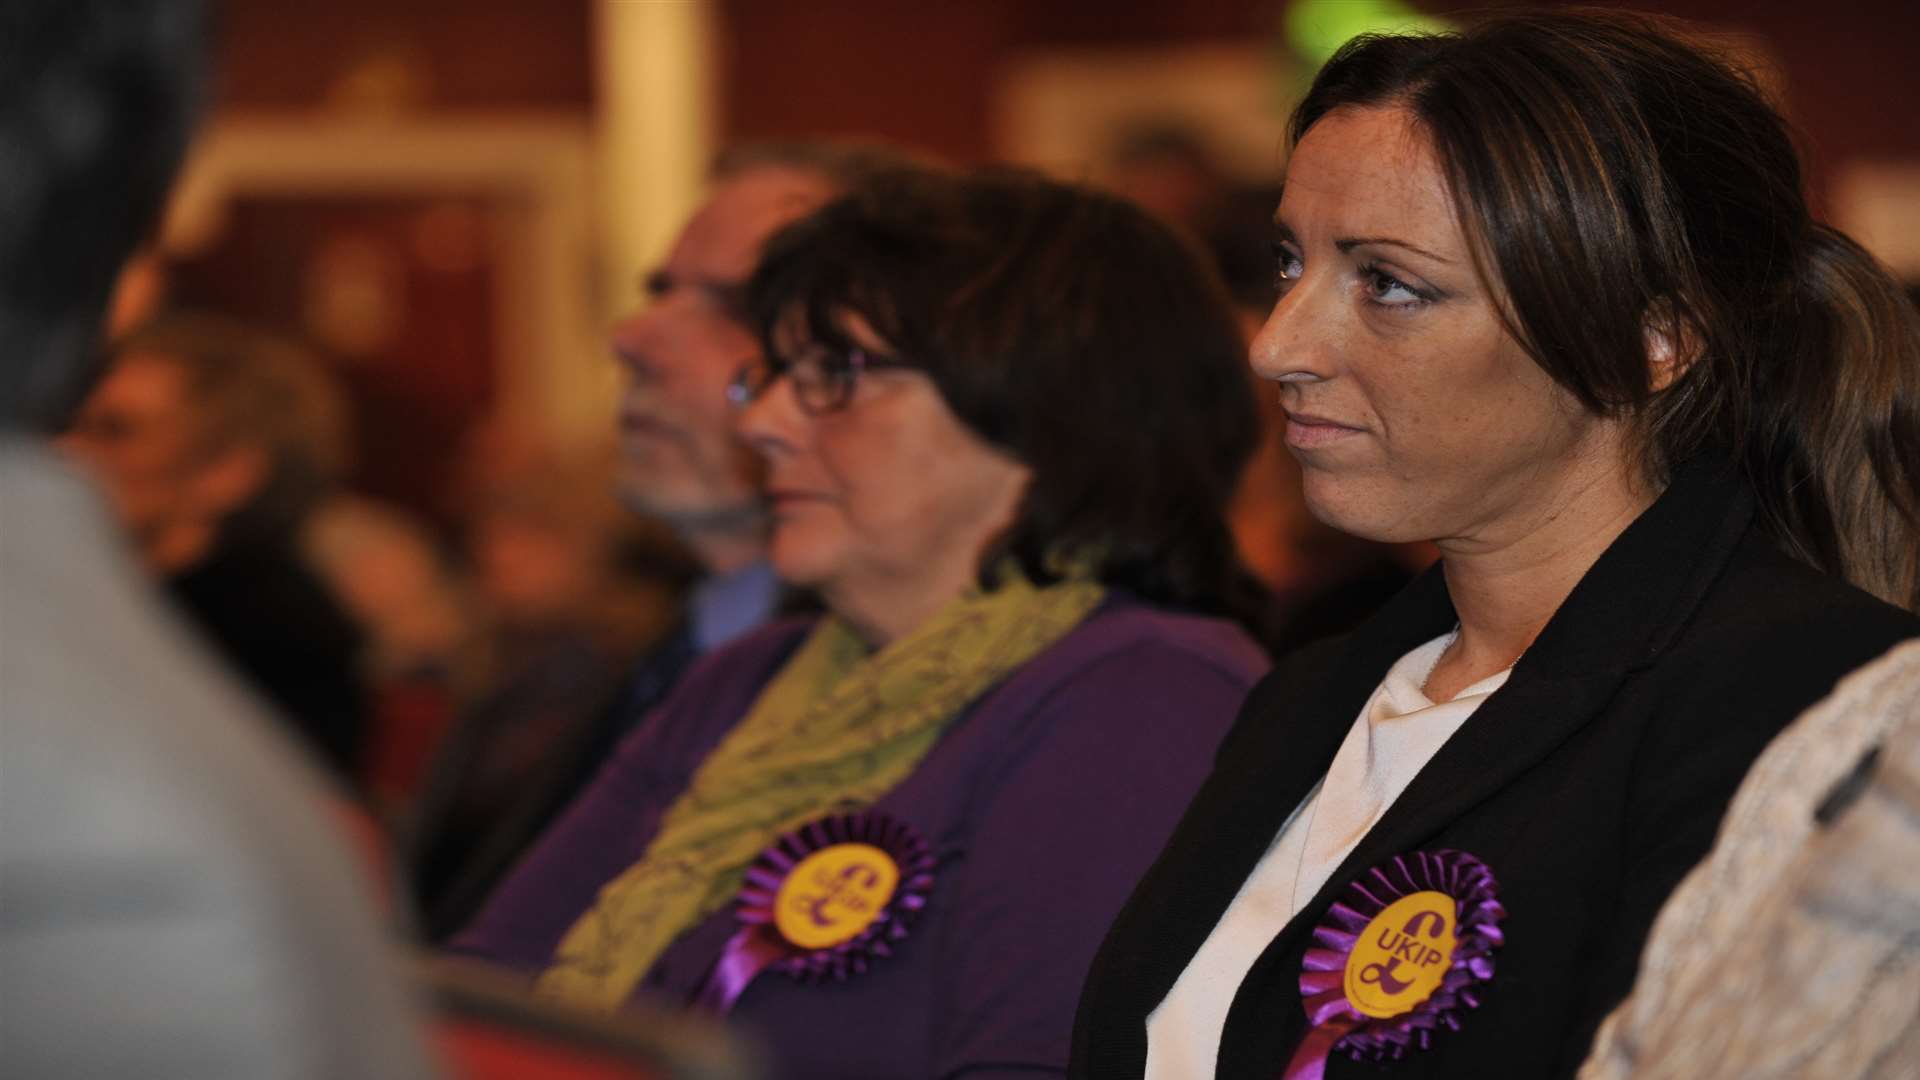 Delegates listen intently to the speeches at the Ukip spring conference at the Winter Gardens in Margate